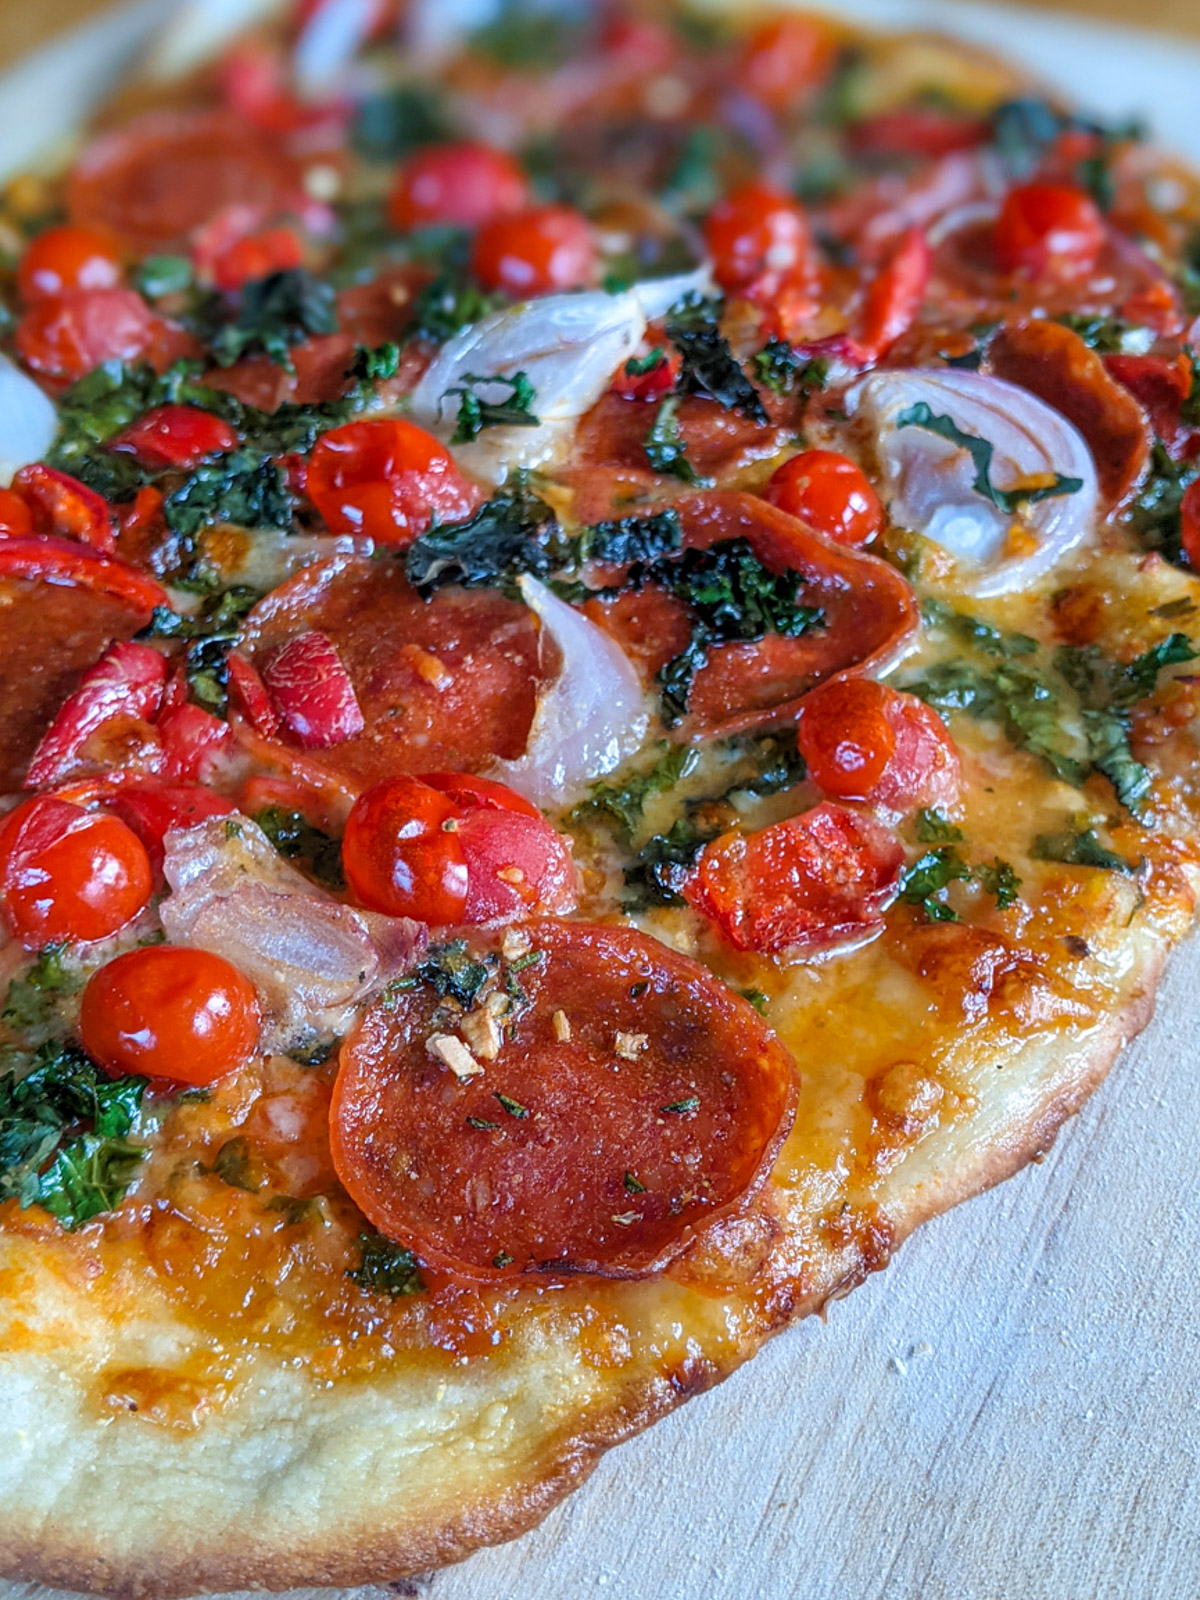 Homemade pizza with pepperoni, red cherry tomatoes, onion and herbs.